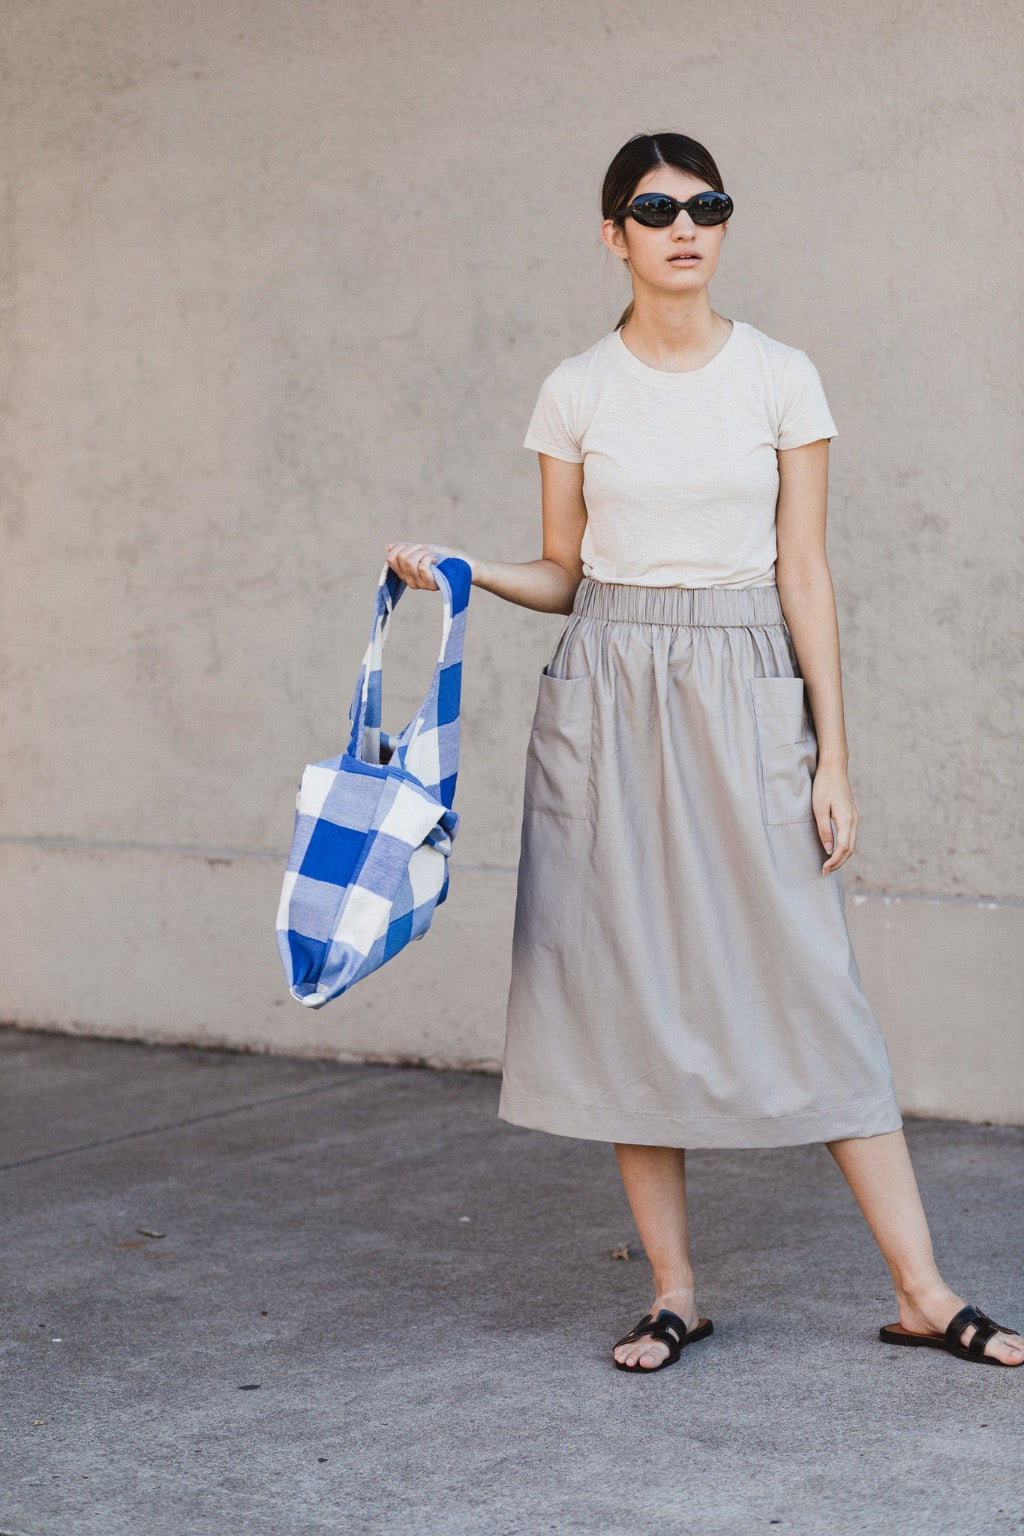 A-Line Skirt in Sand Cotton